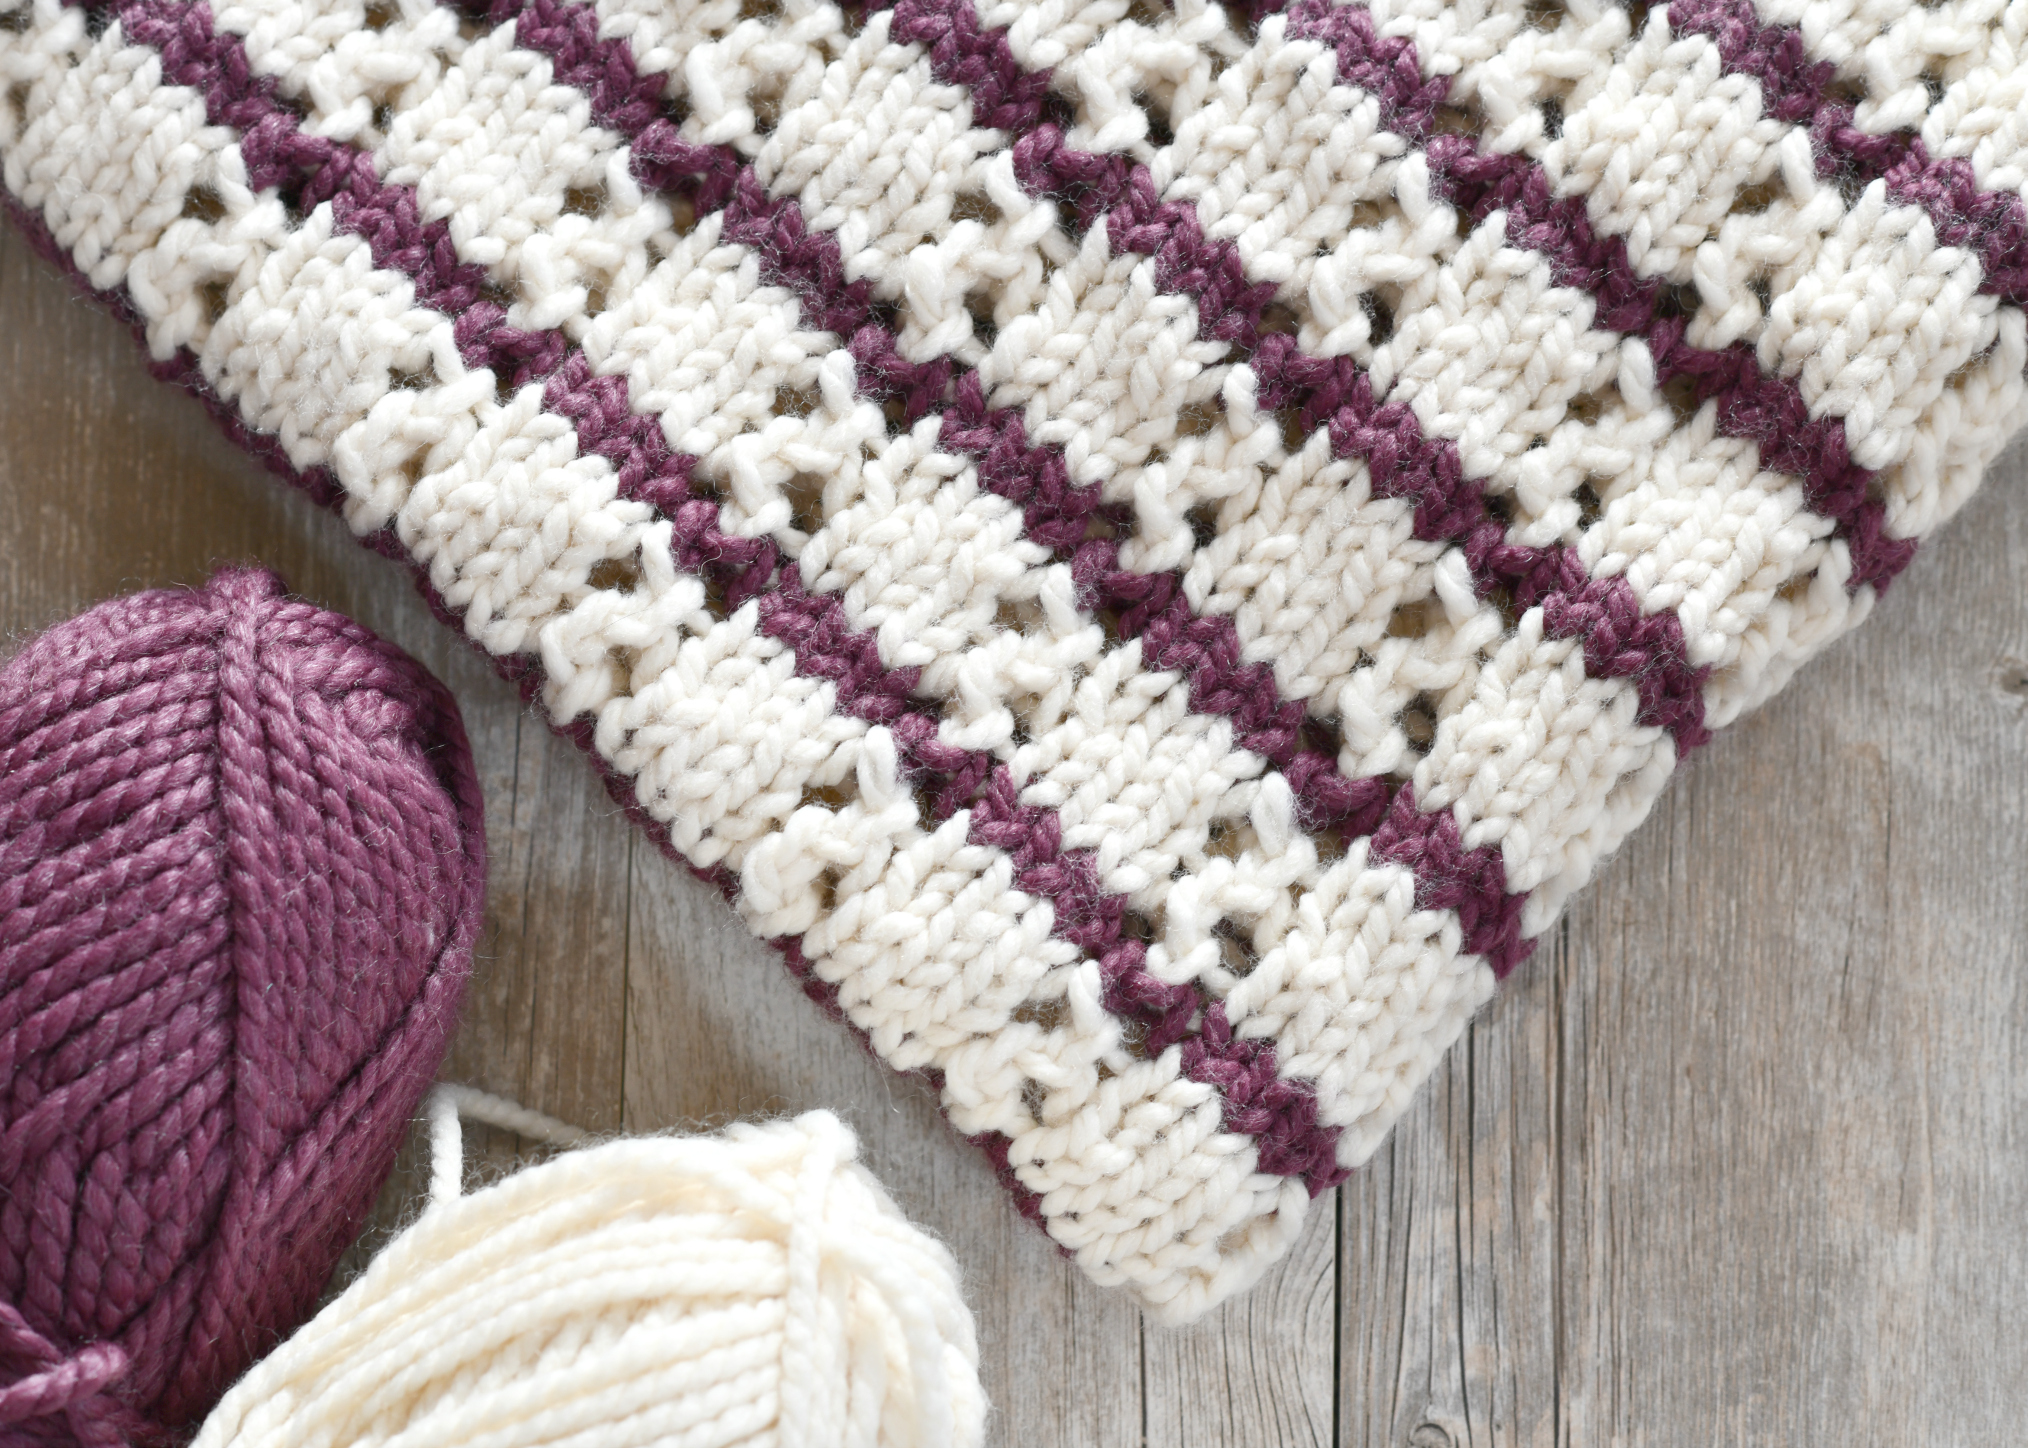 Basic knit and purl patterns